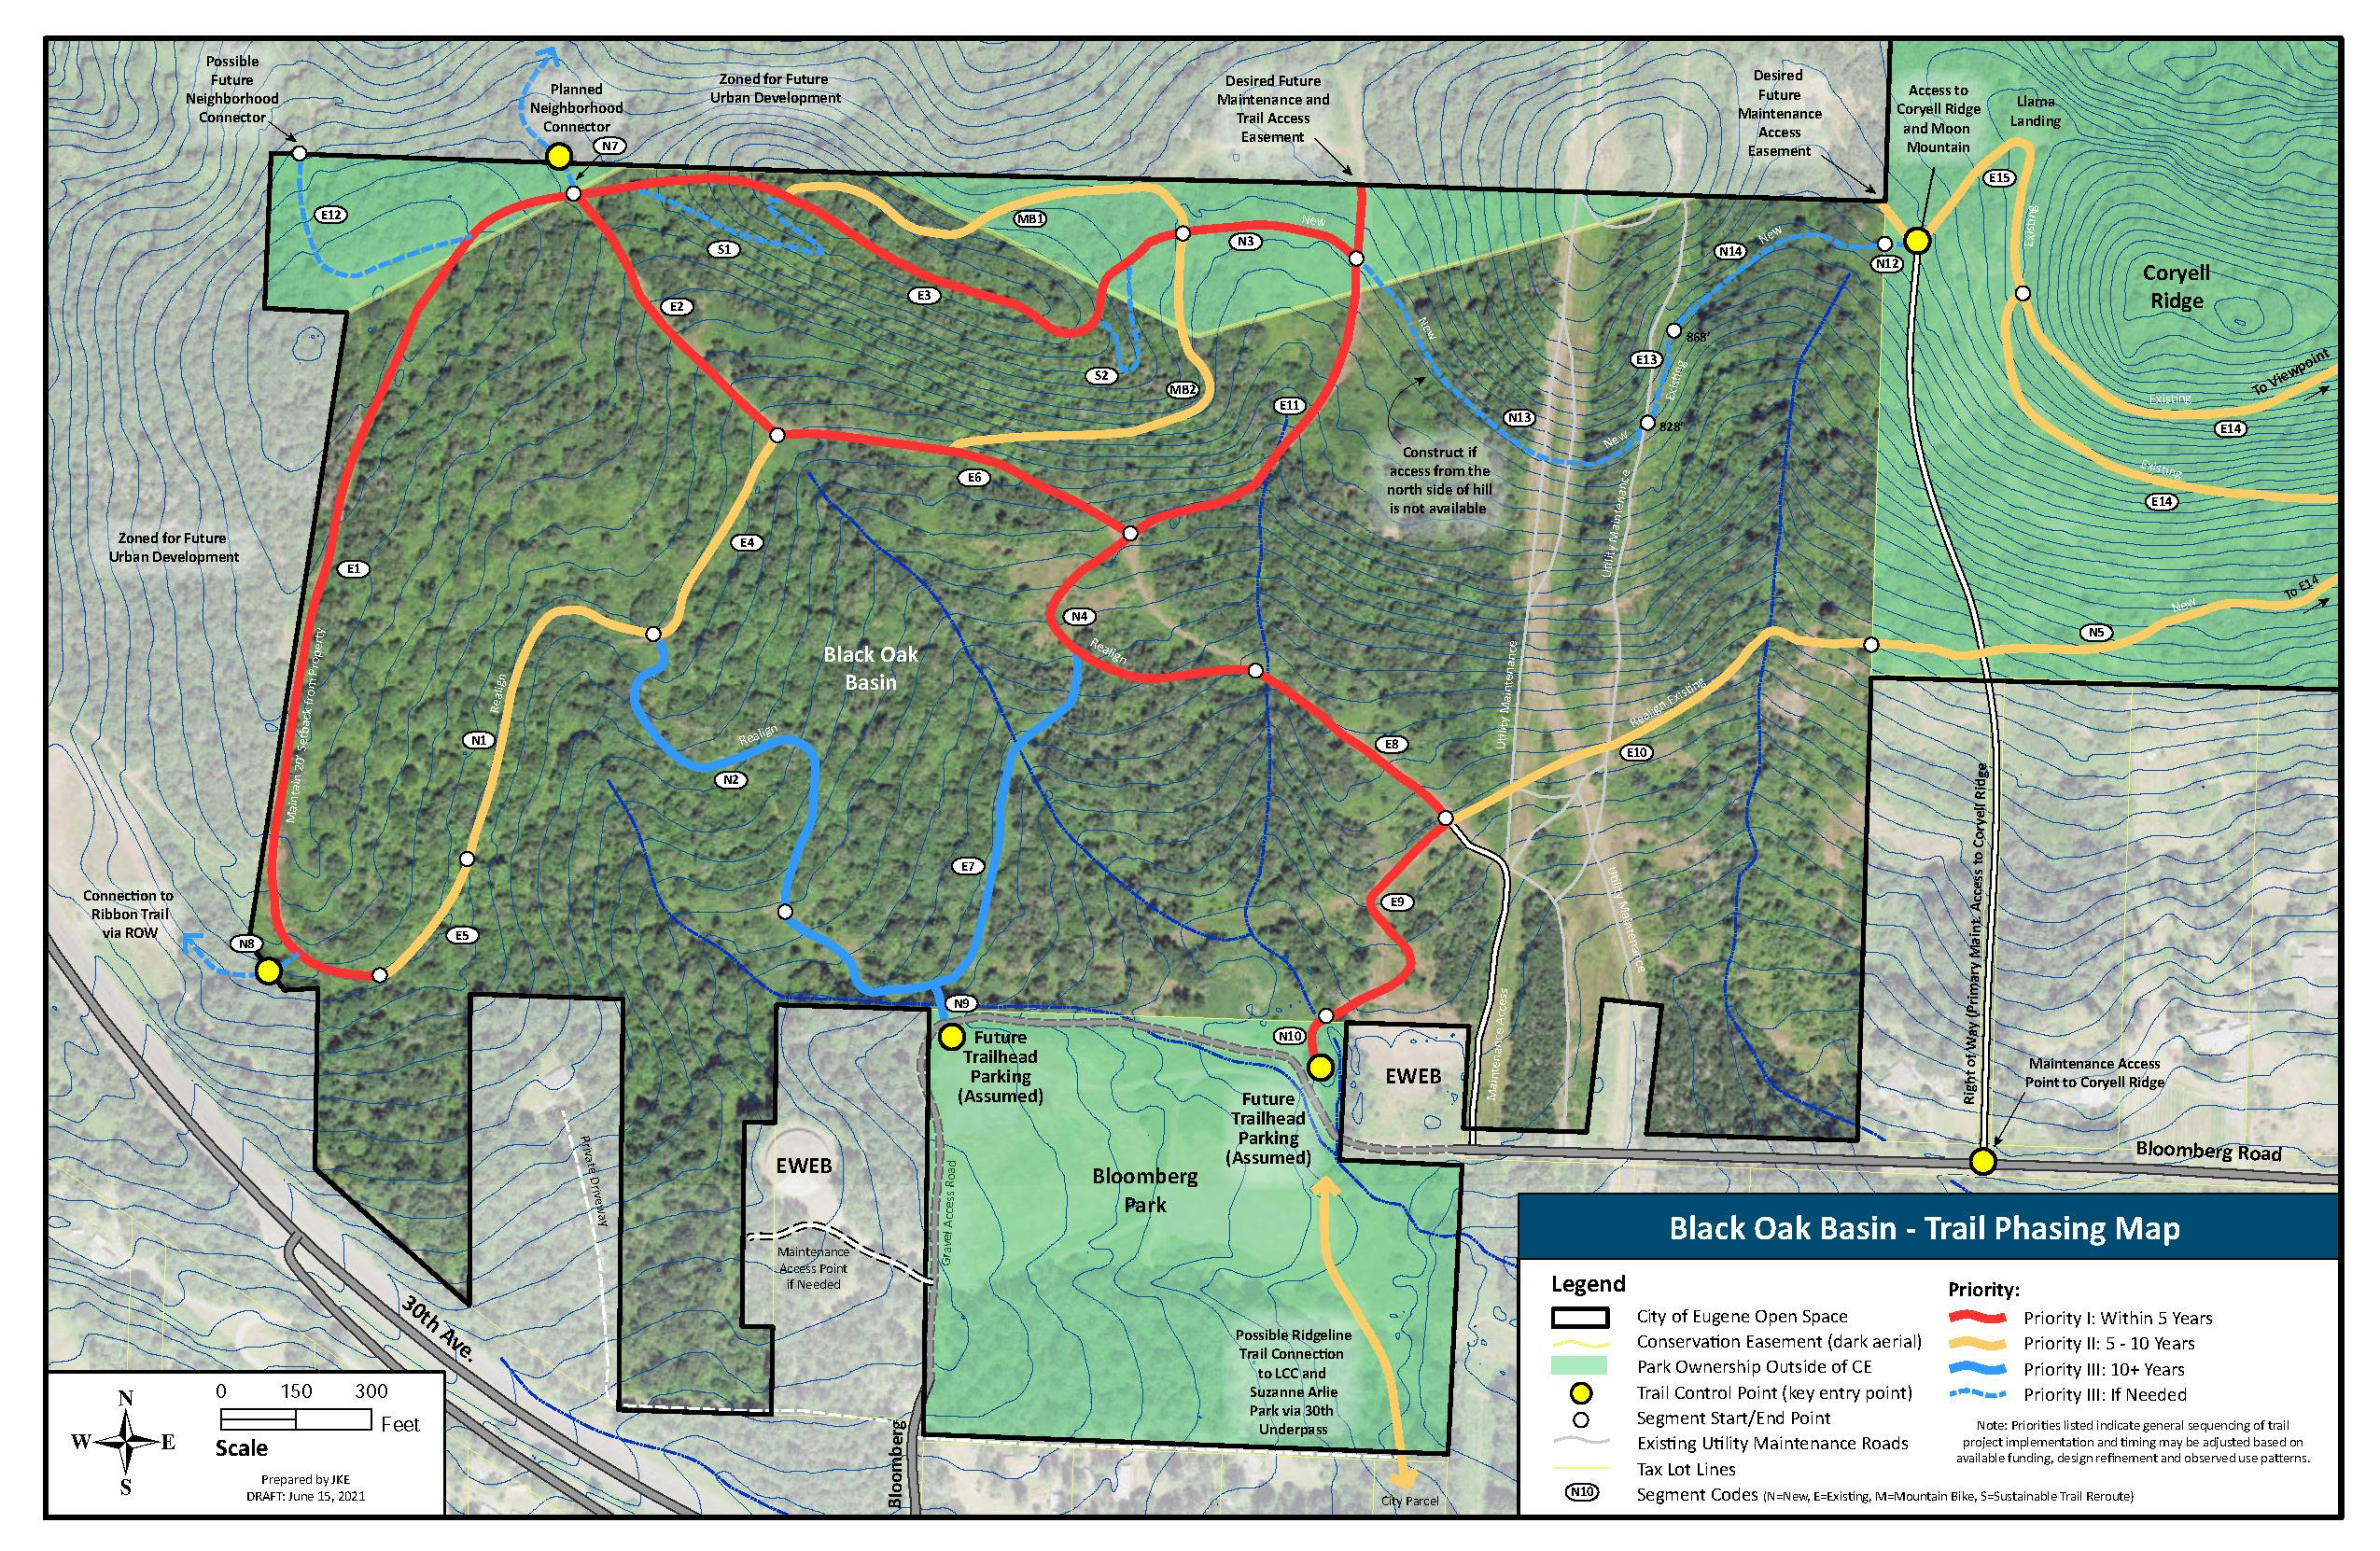 Public Access and Trail Phasing Map